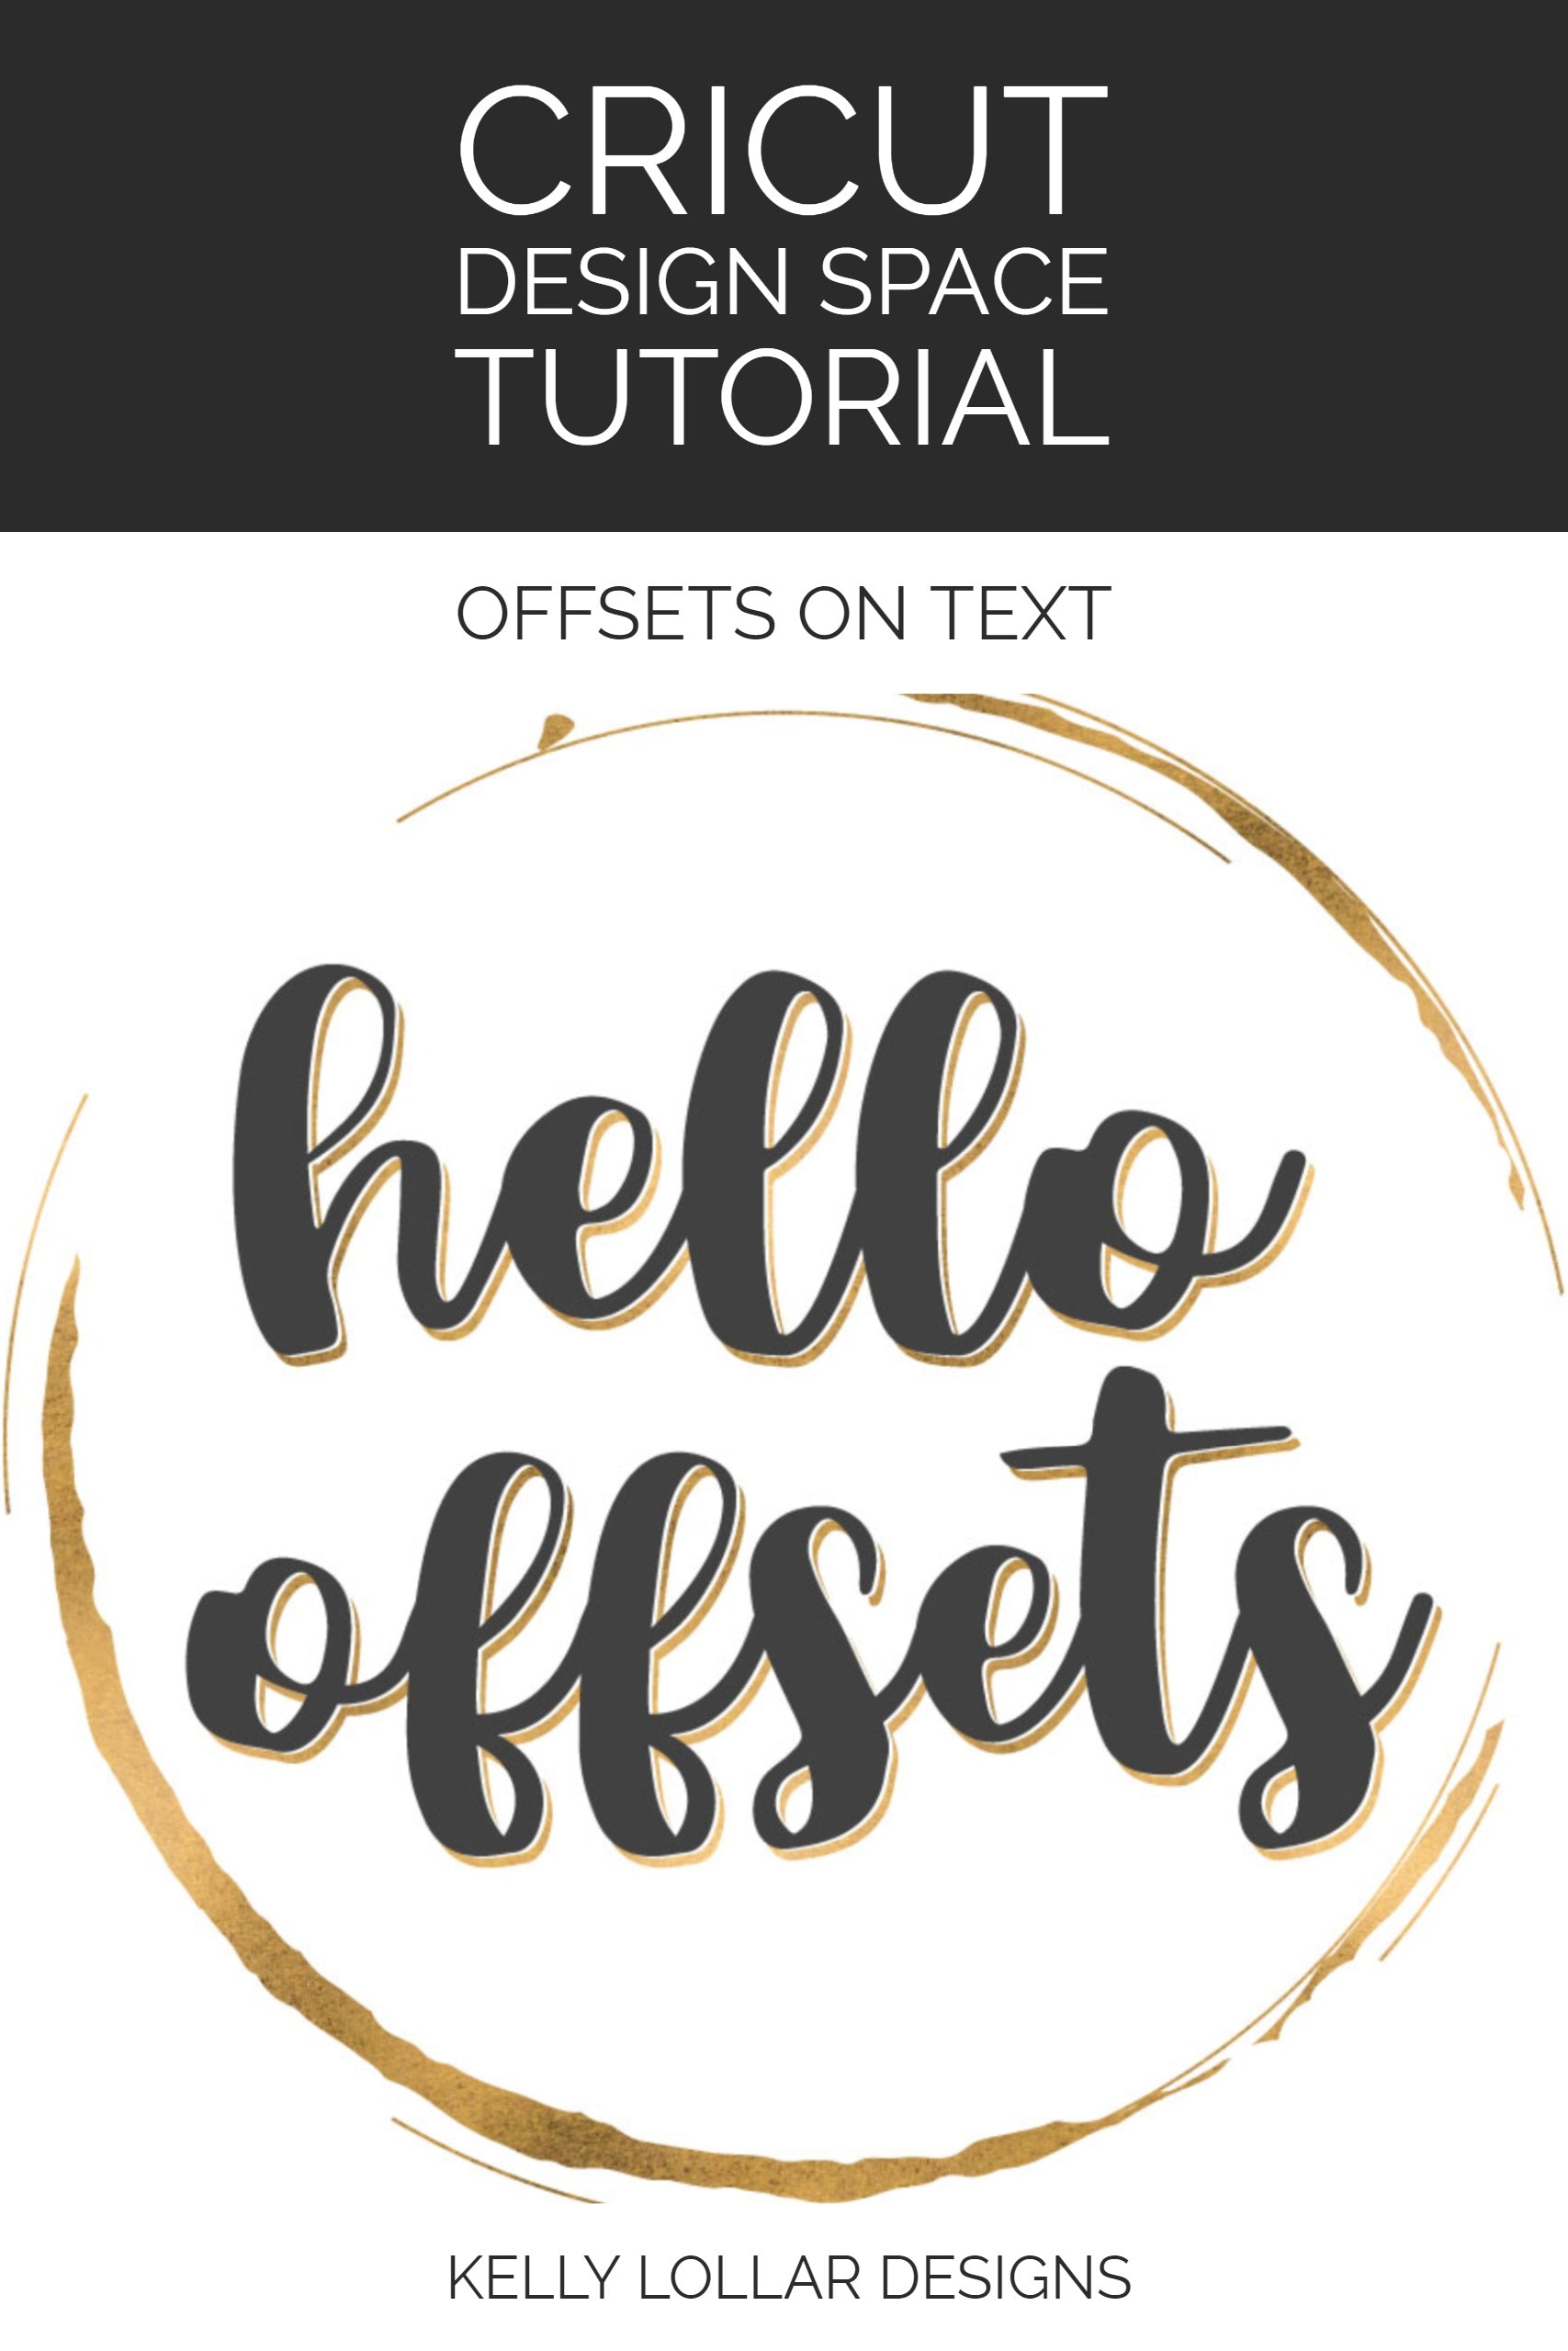 Cricut Design Space Tutorial - Creating Offsets on Text | Kelly Lollar Designs